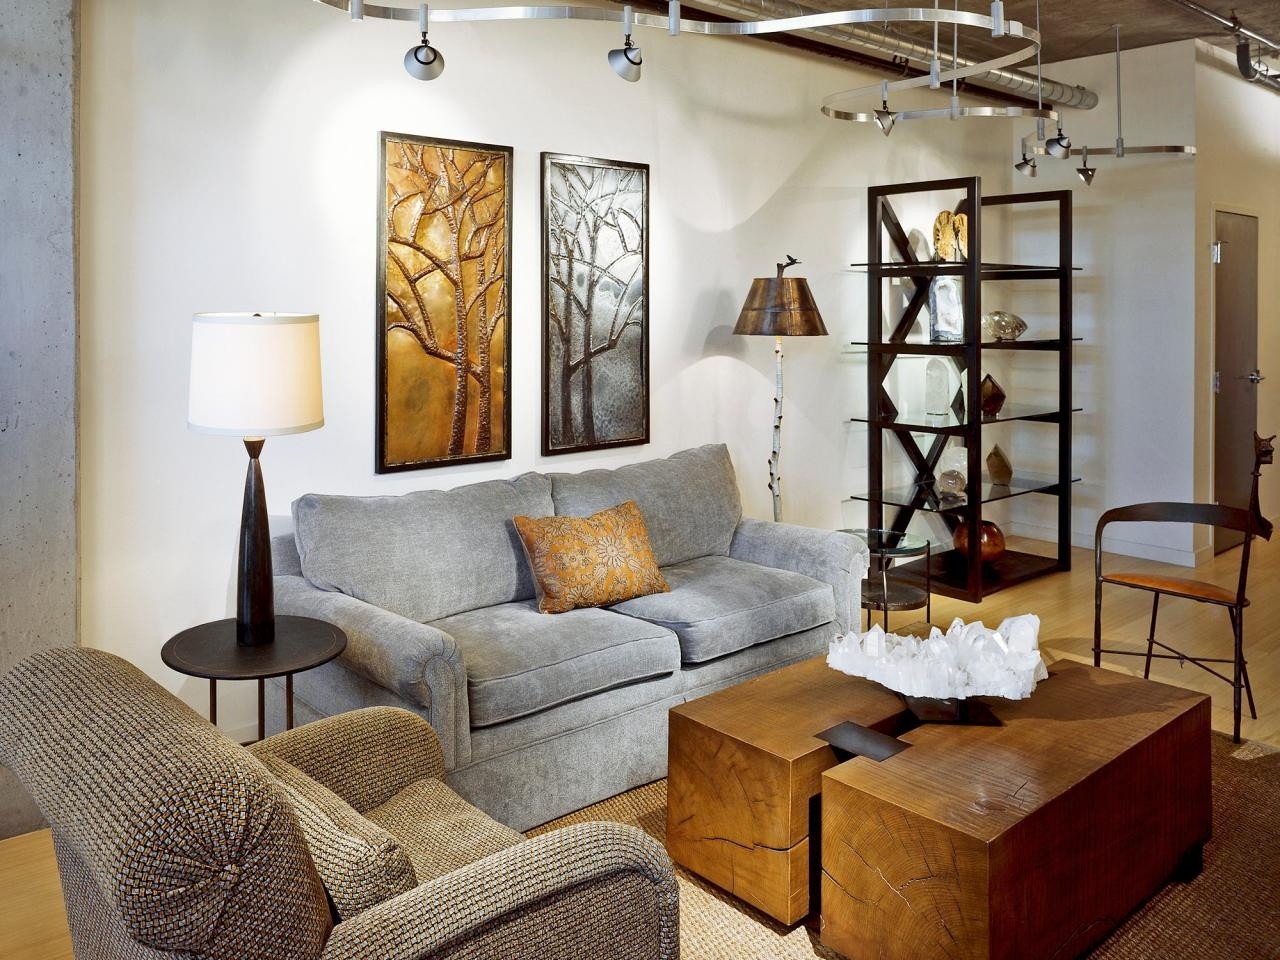 Living Room Floor Lamp Ideas
 How to Decorate your Living Room with Floor and Table Lamps